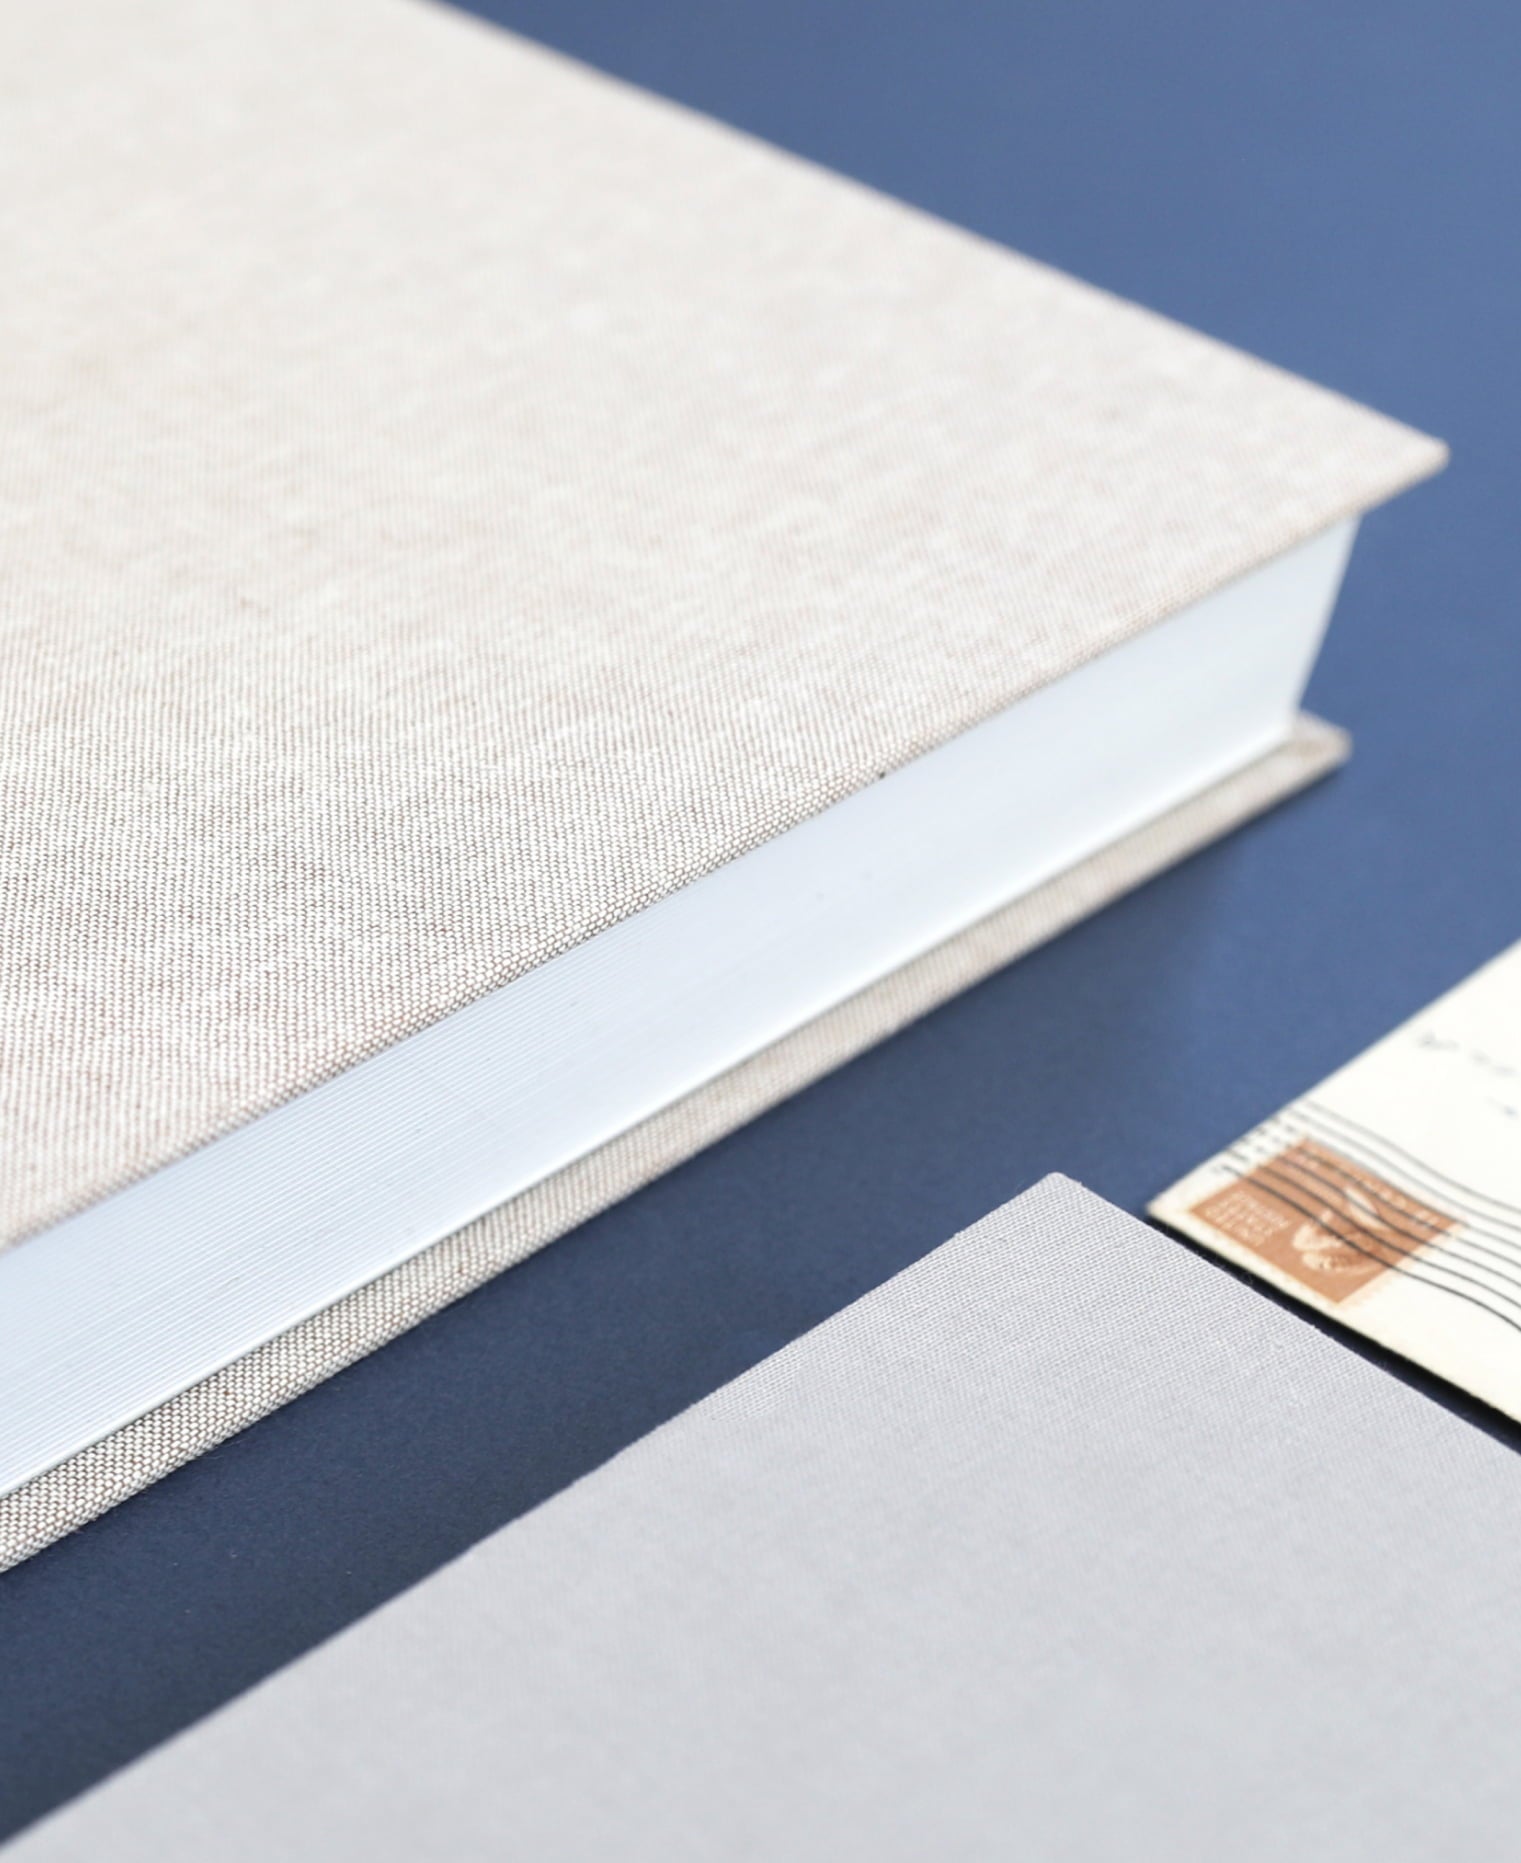 Closed Layflat Photo Album showcasing cover fabric and ultra-thick album pages 